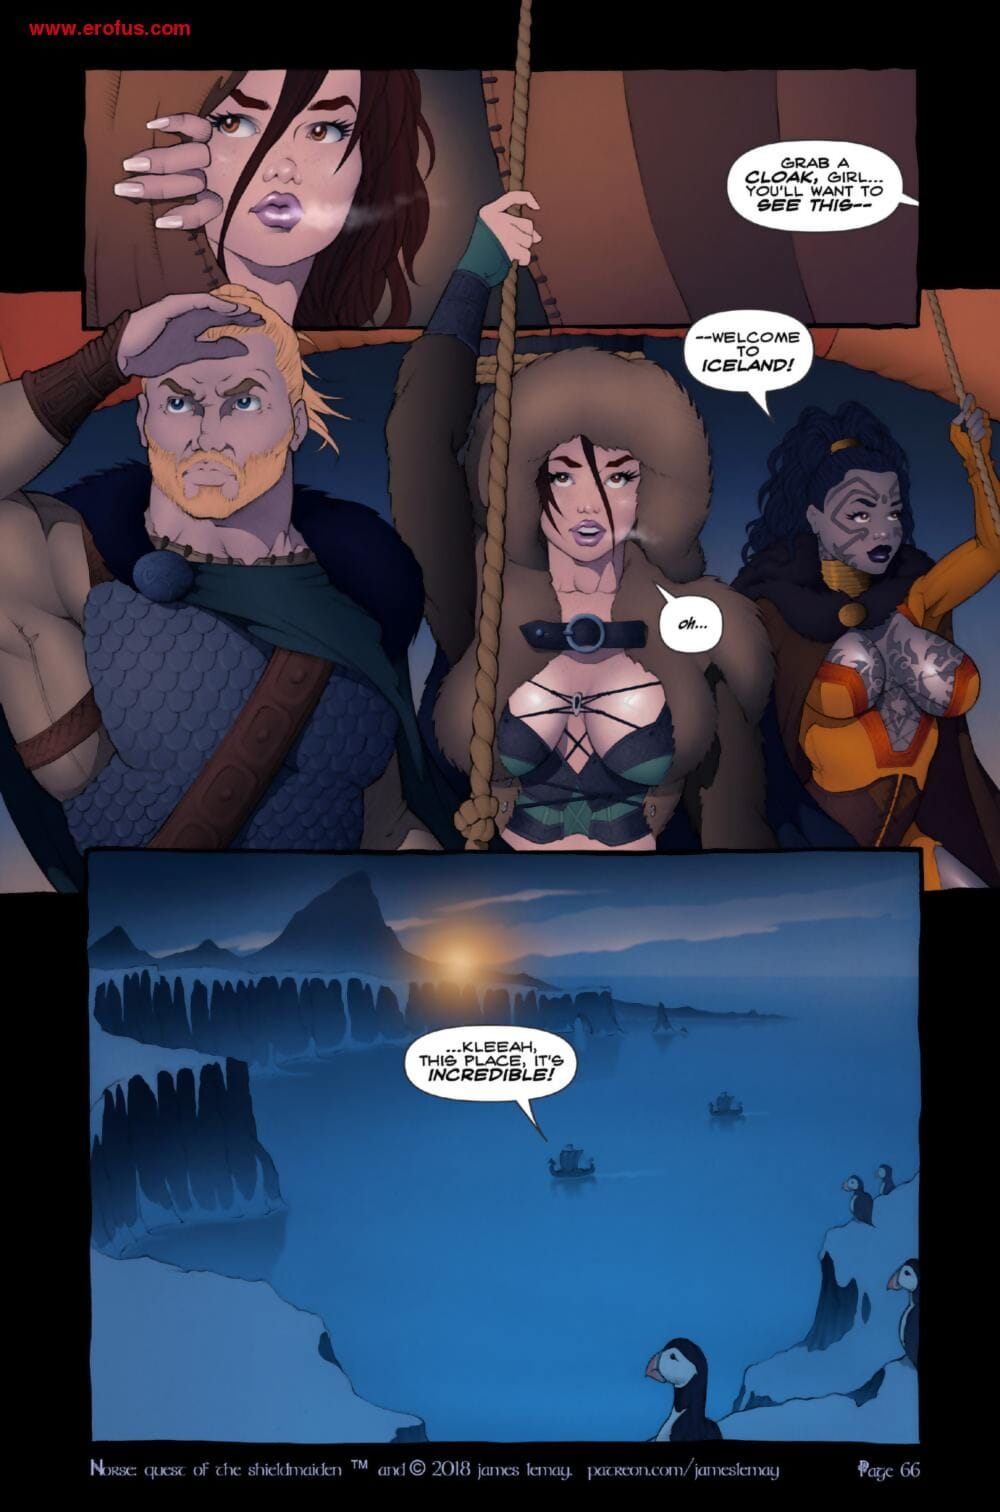 Quest of the Shield Maiden - part 4